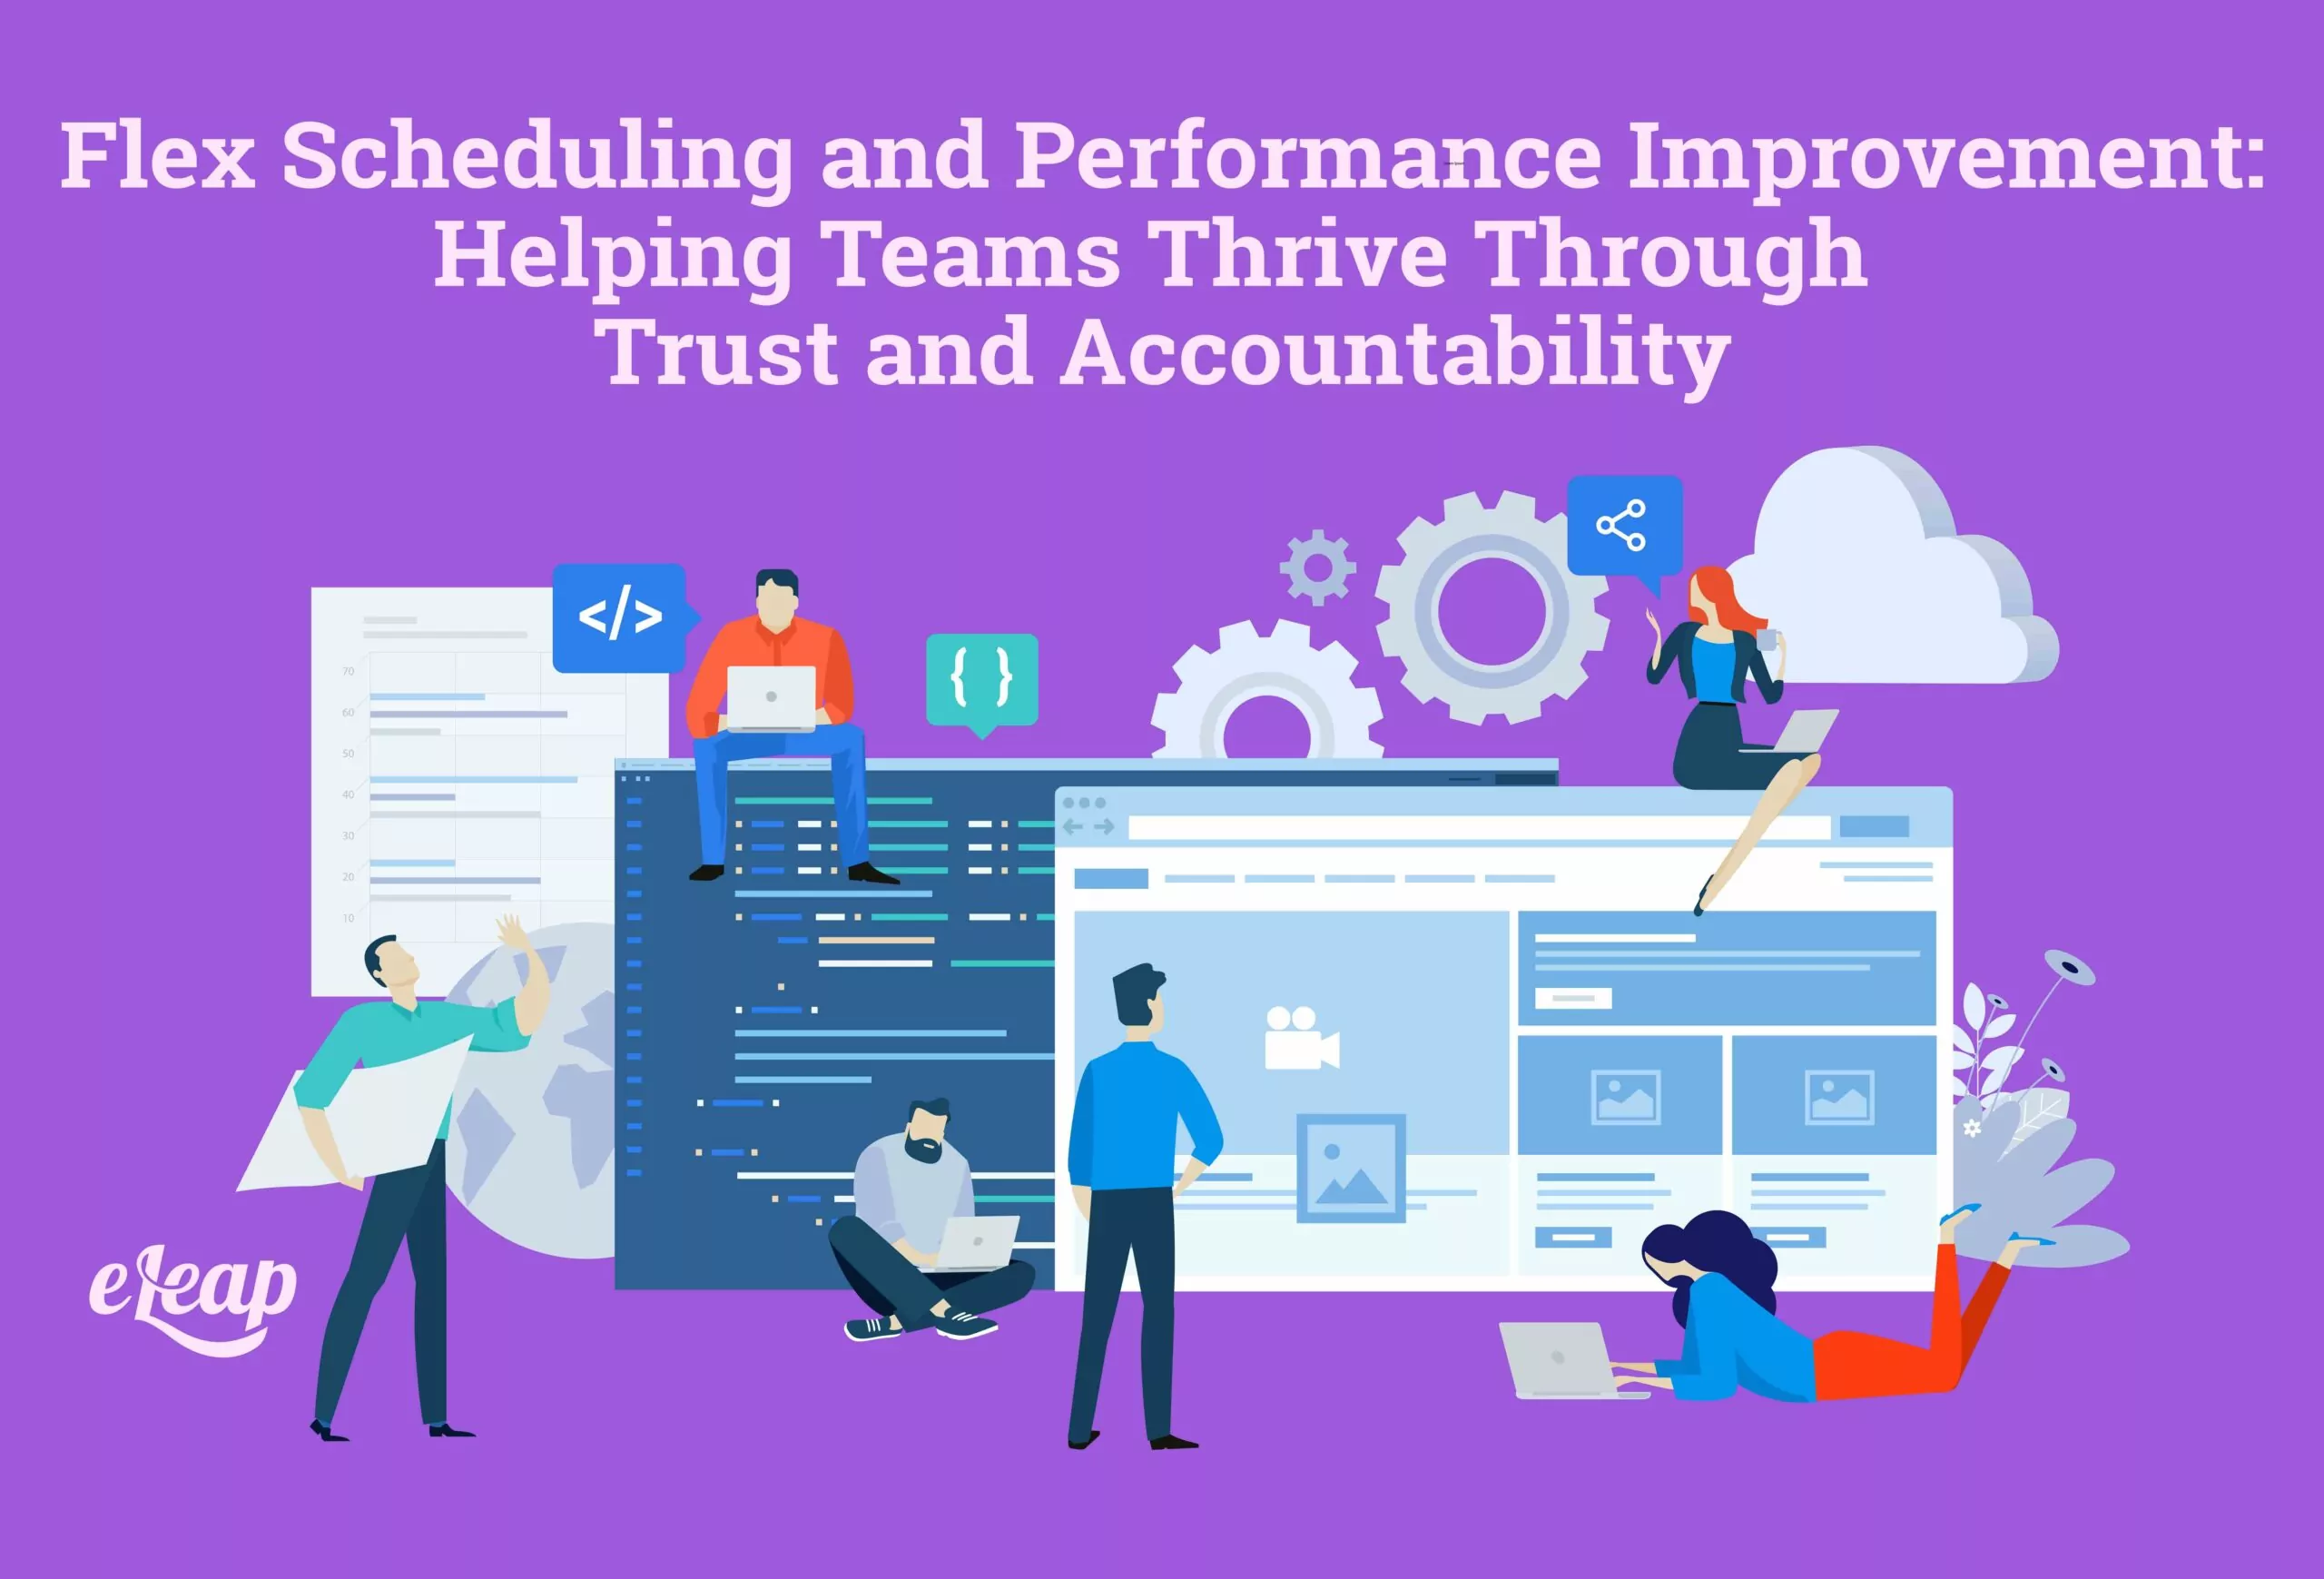 Flex Scheduling and Performance Improvement: Helping Teams Thrive Through Trust and Accountability